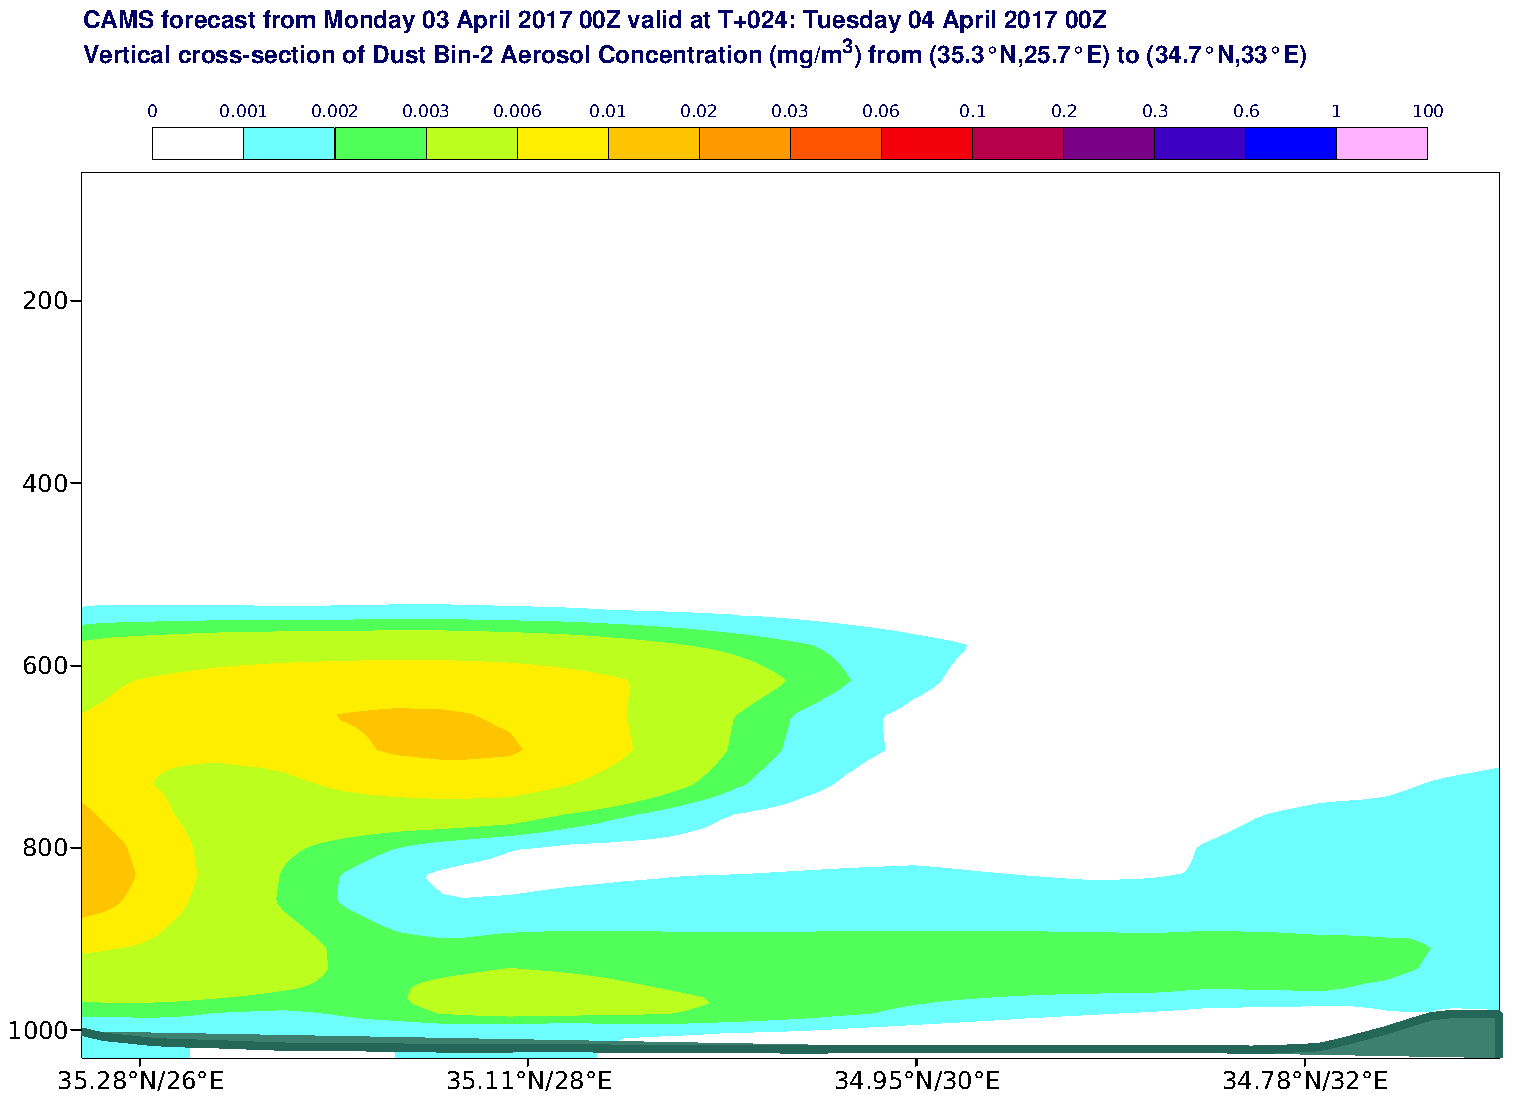 Vertical cross-section of Dust Bin-2 Aerosol Concentration (mg/m3) valid at T24 - 2017-04-04 00:00